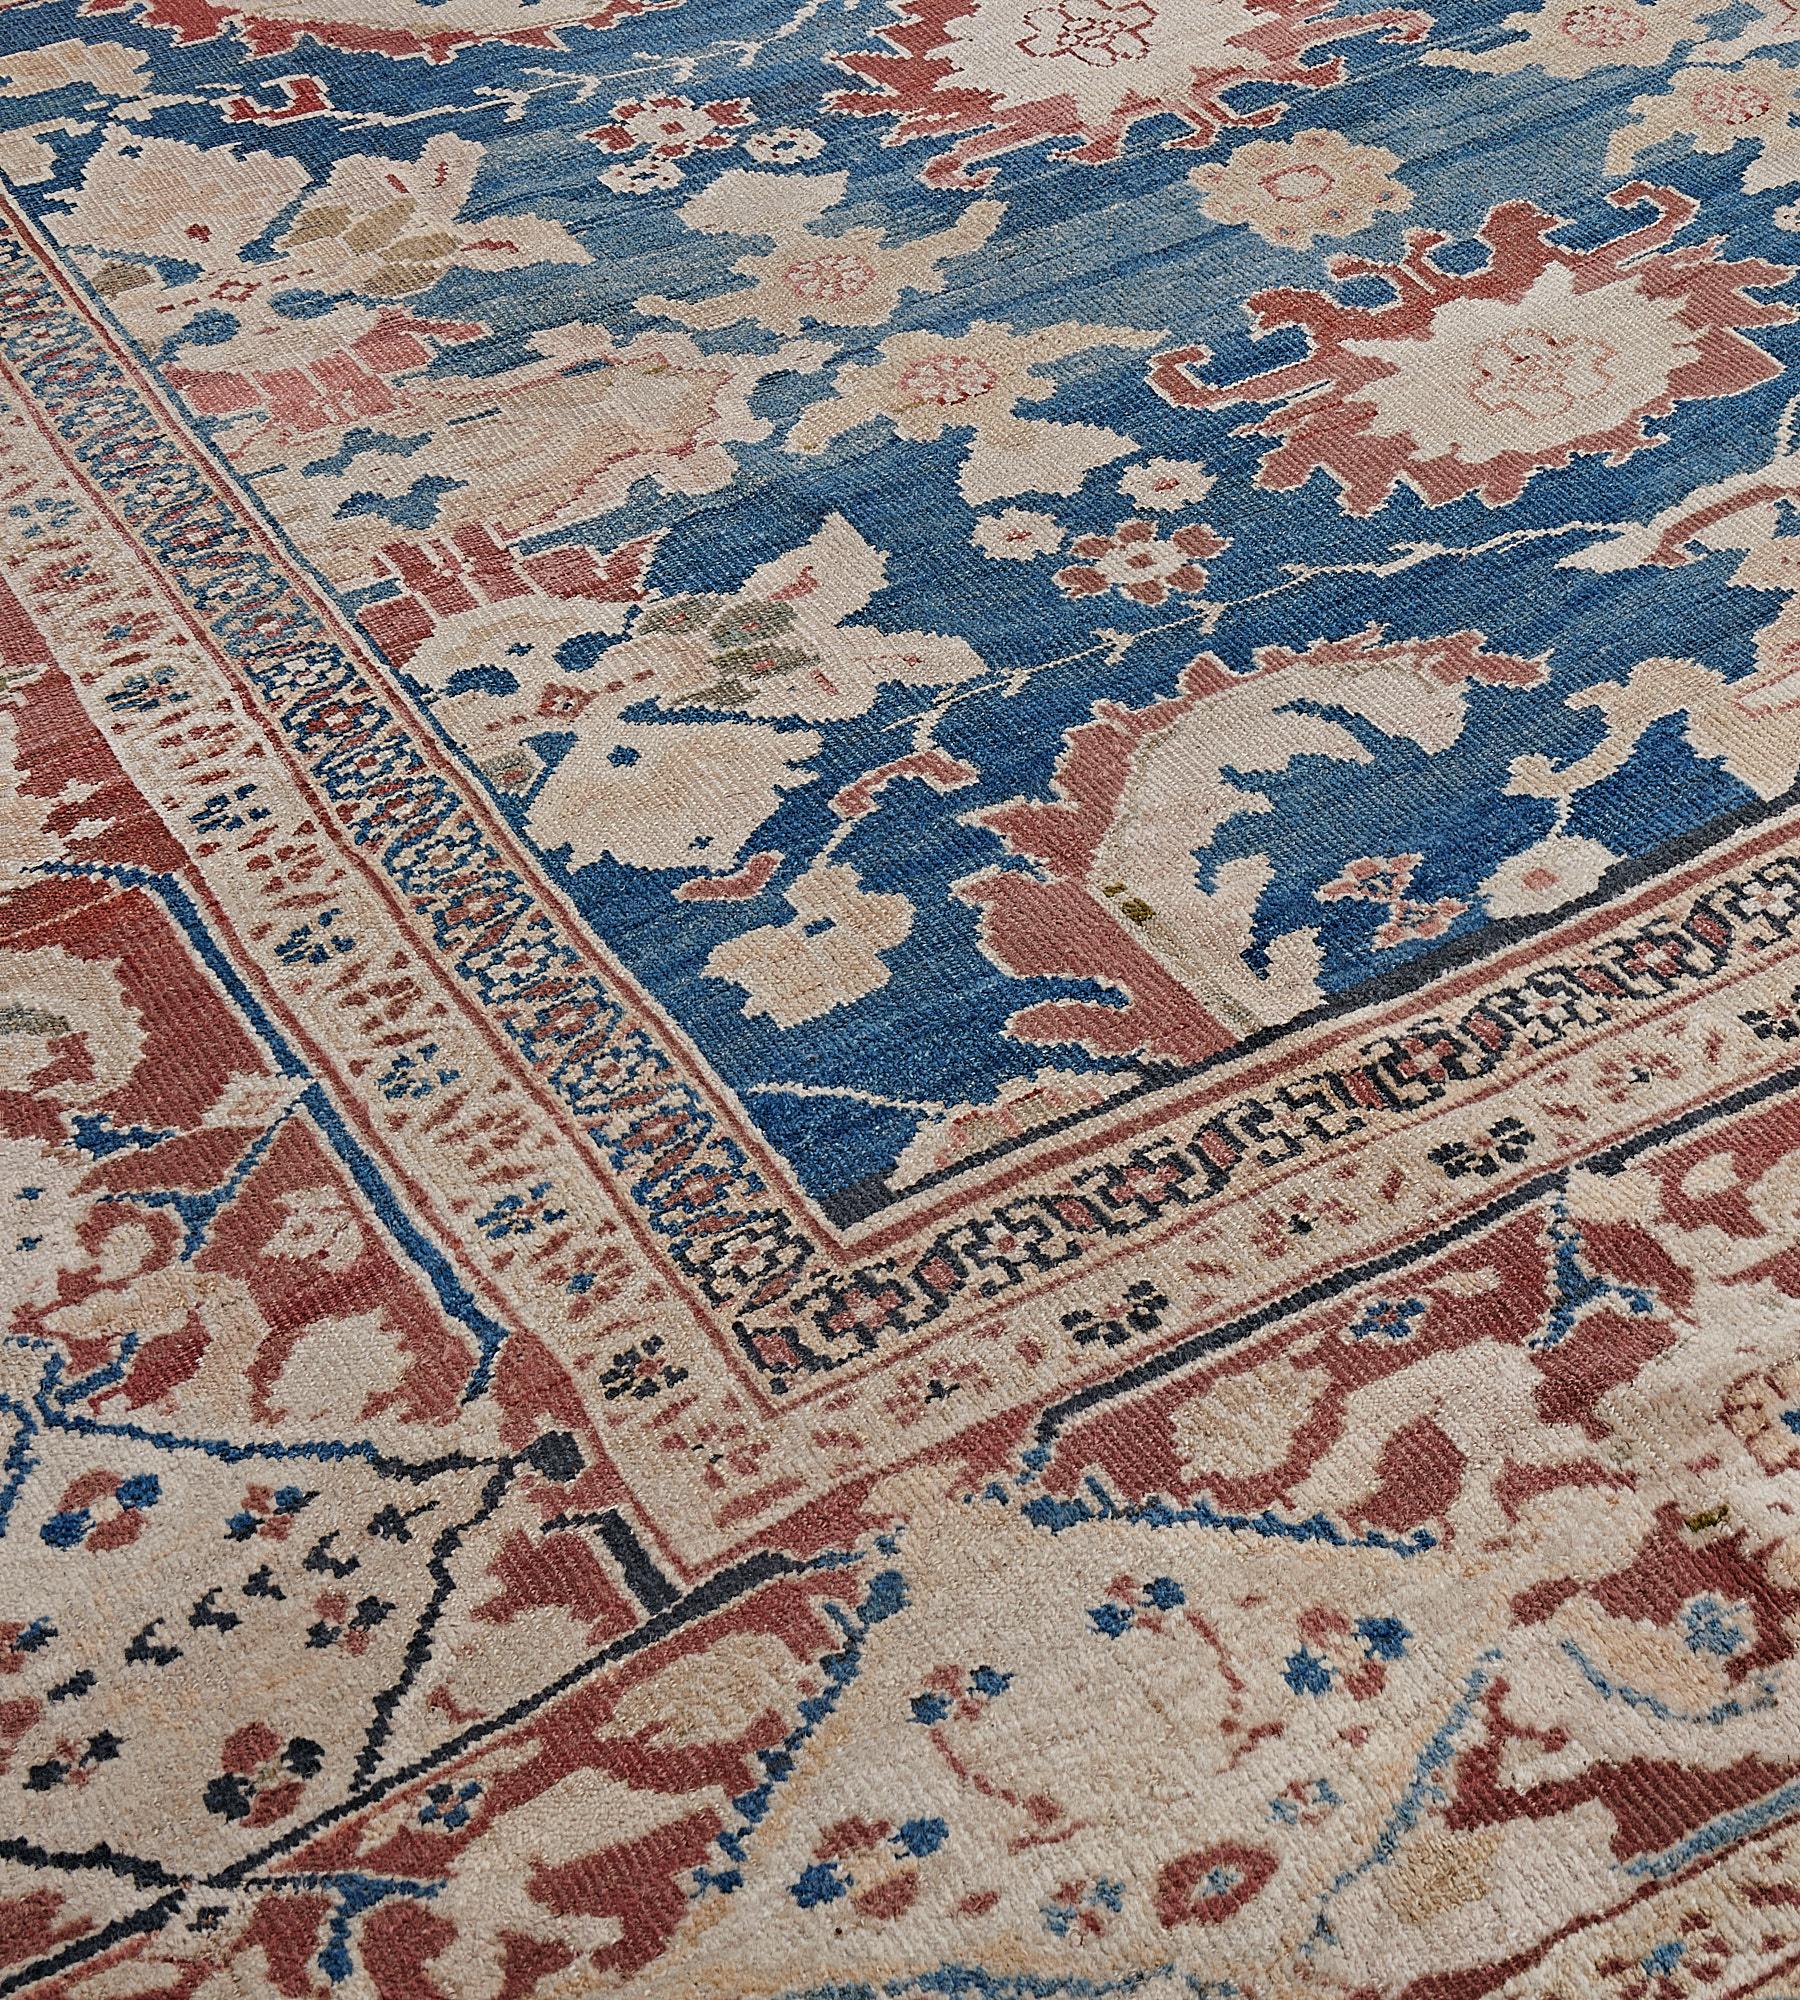 This traditional hand-woven Persian Ziegler Sultanabad rug has a shaded medium blue field with symmetrical rust and cream floral motifs and serrated curling leaves with subtle accents of artichoke-green foliage, in a broad rust border with